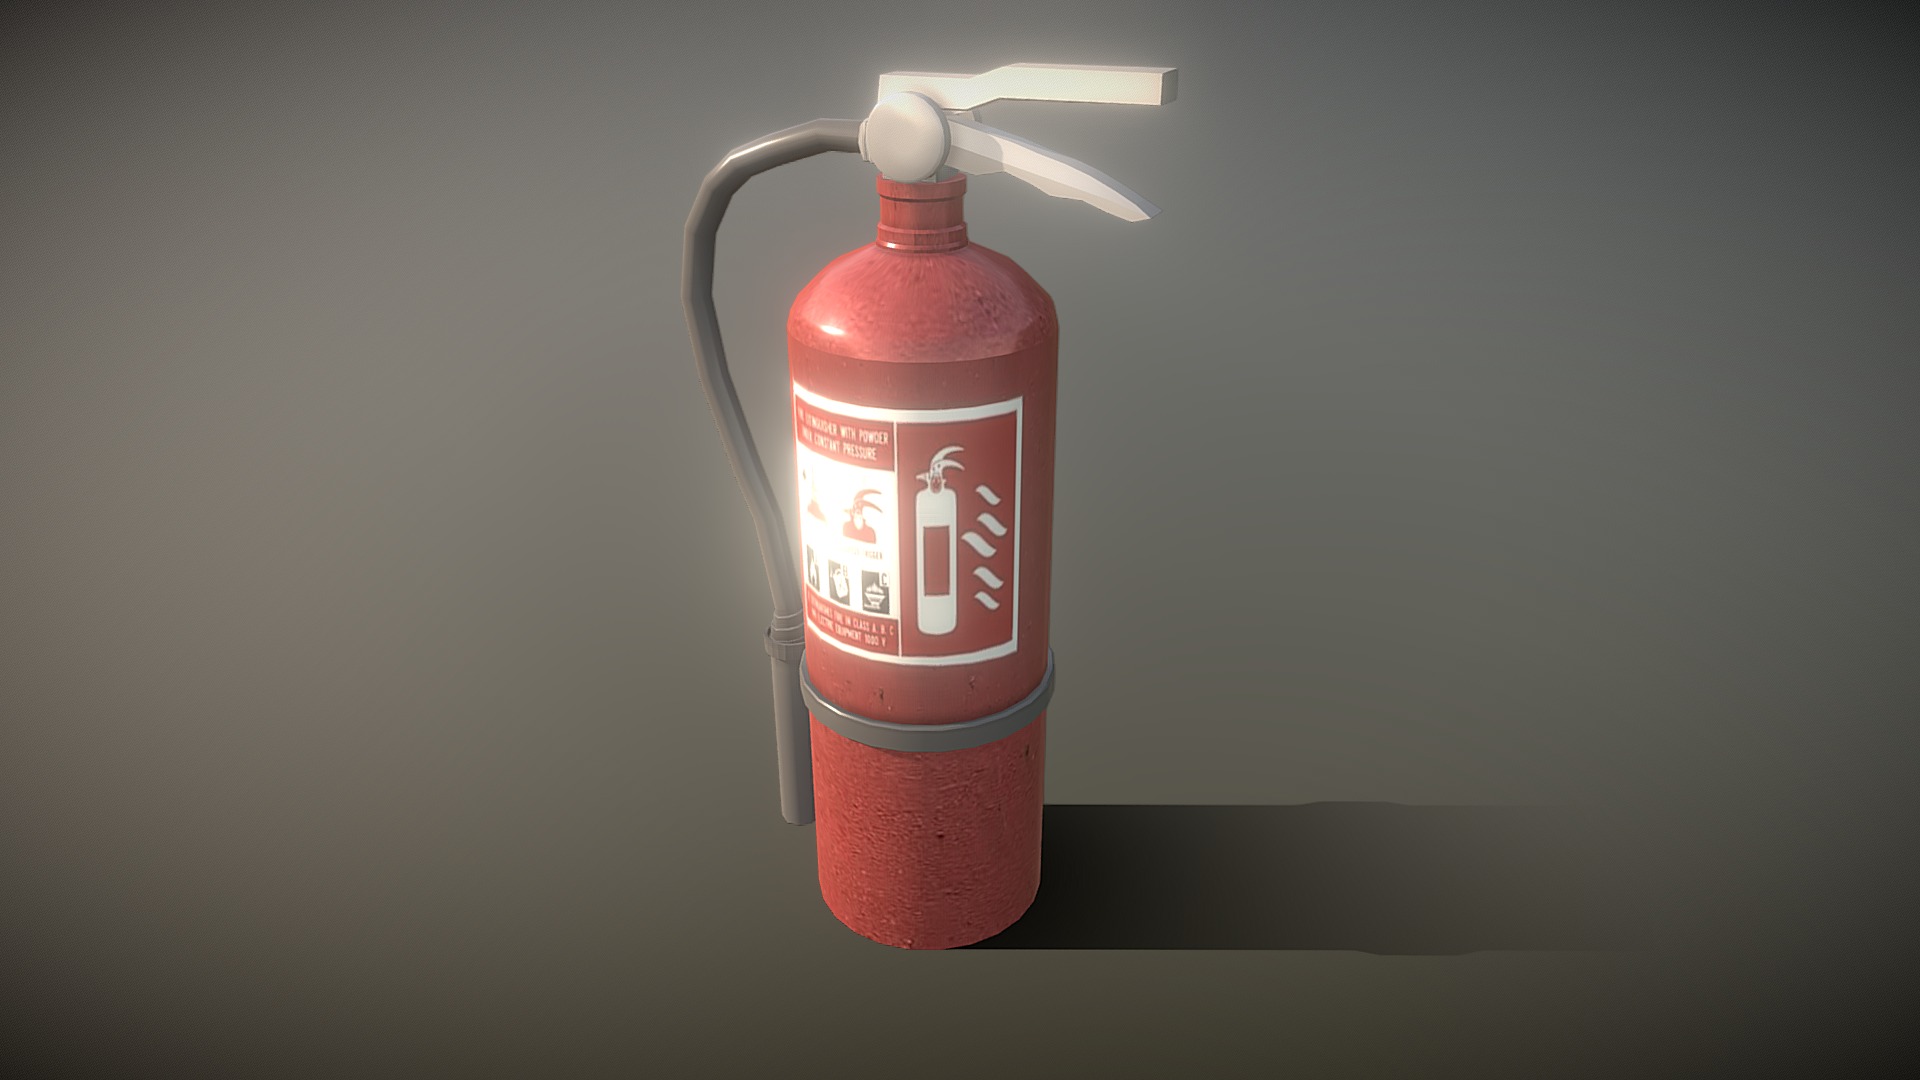 3D model Fire Extingusher - This is a 3D model of the Fire Extingusher. The 3D model is about a red and white fire extinguisher.